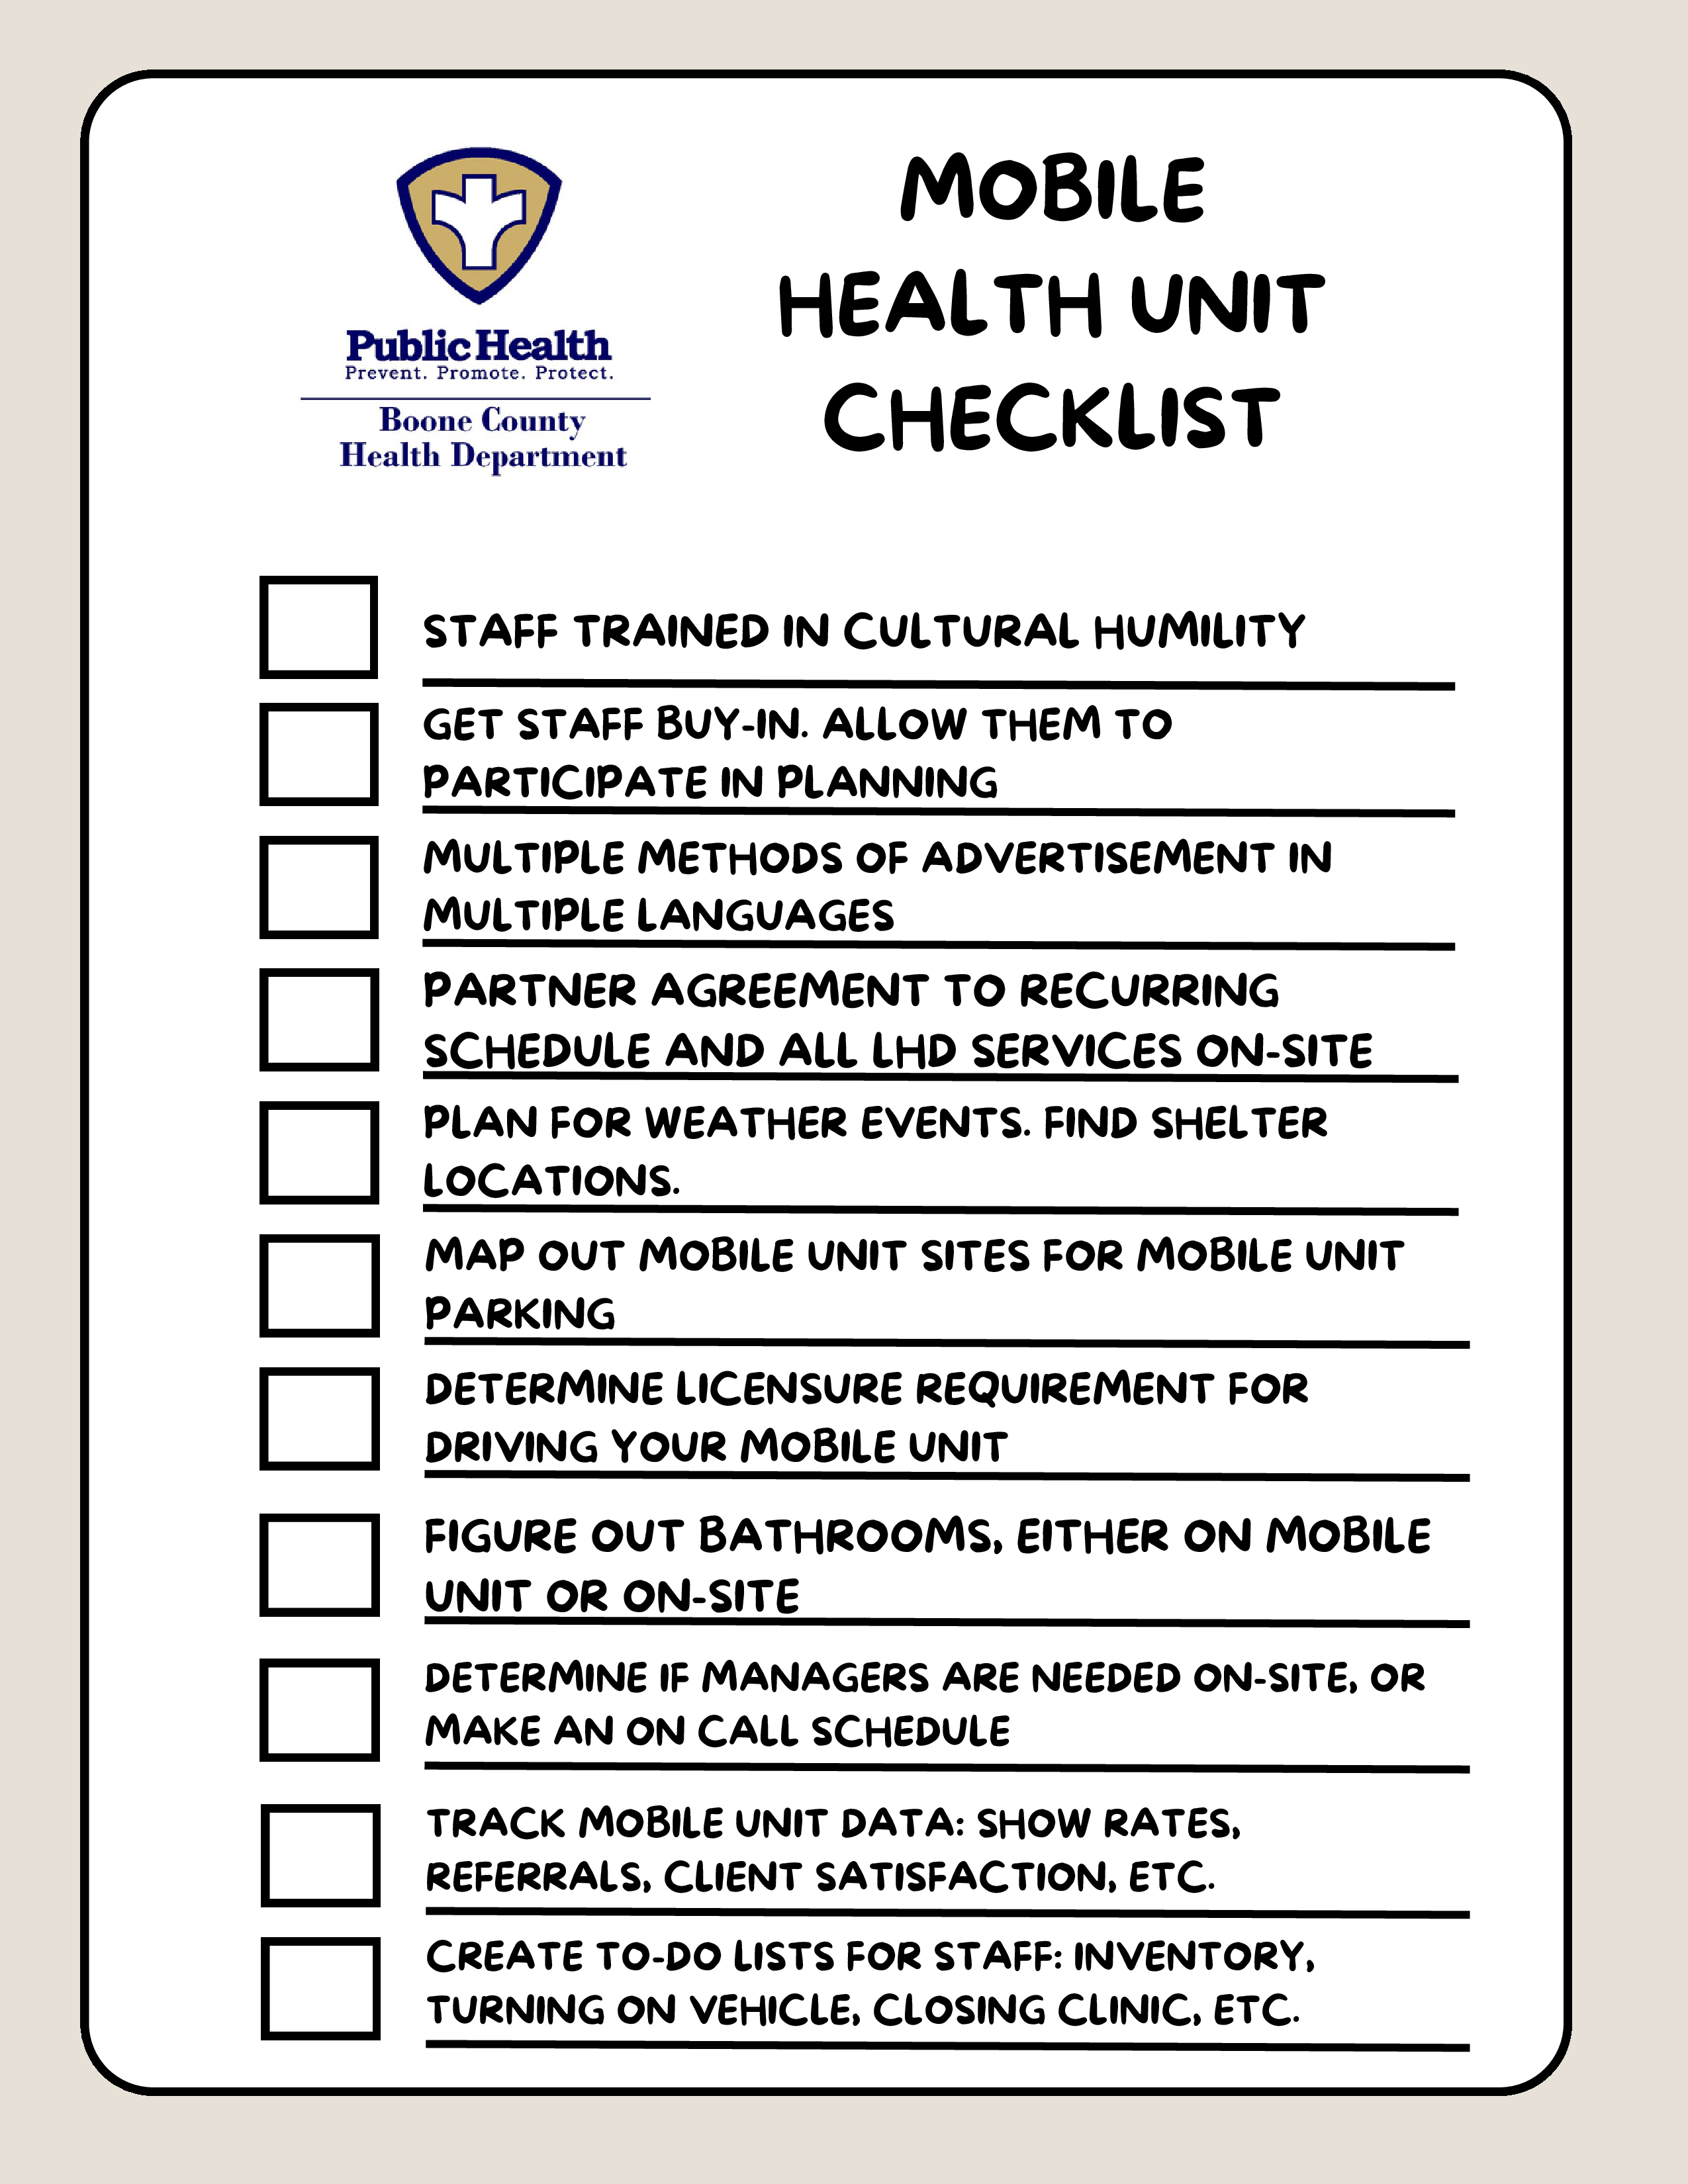 PDF shows checklist of suggestions for organizing mobile health units.